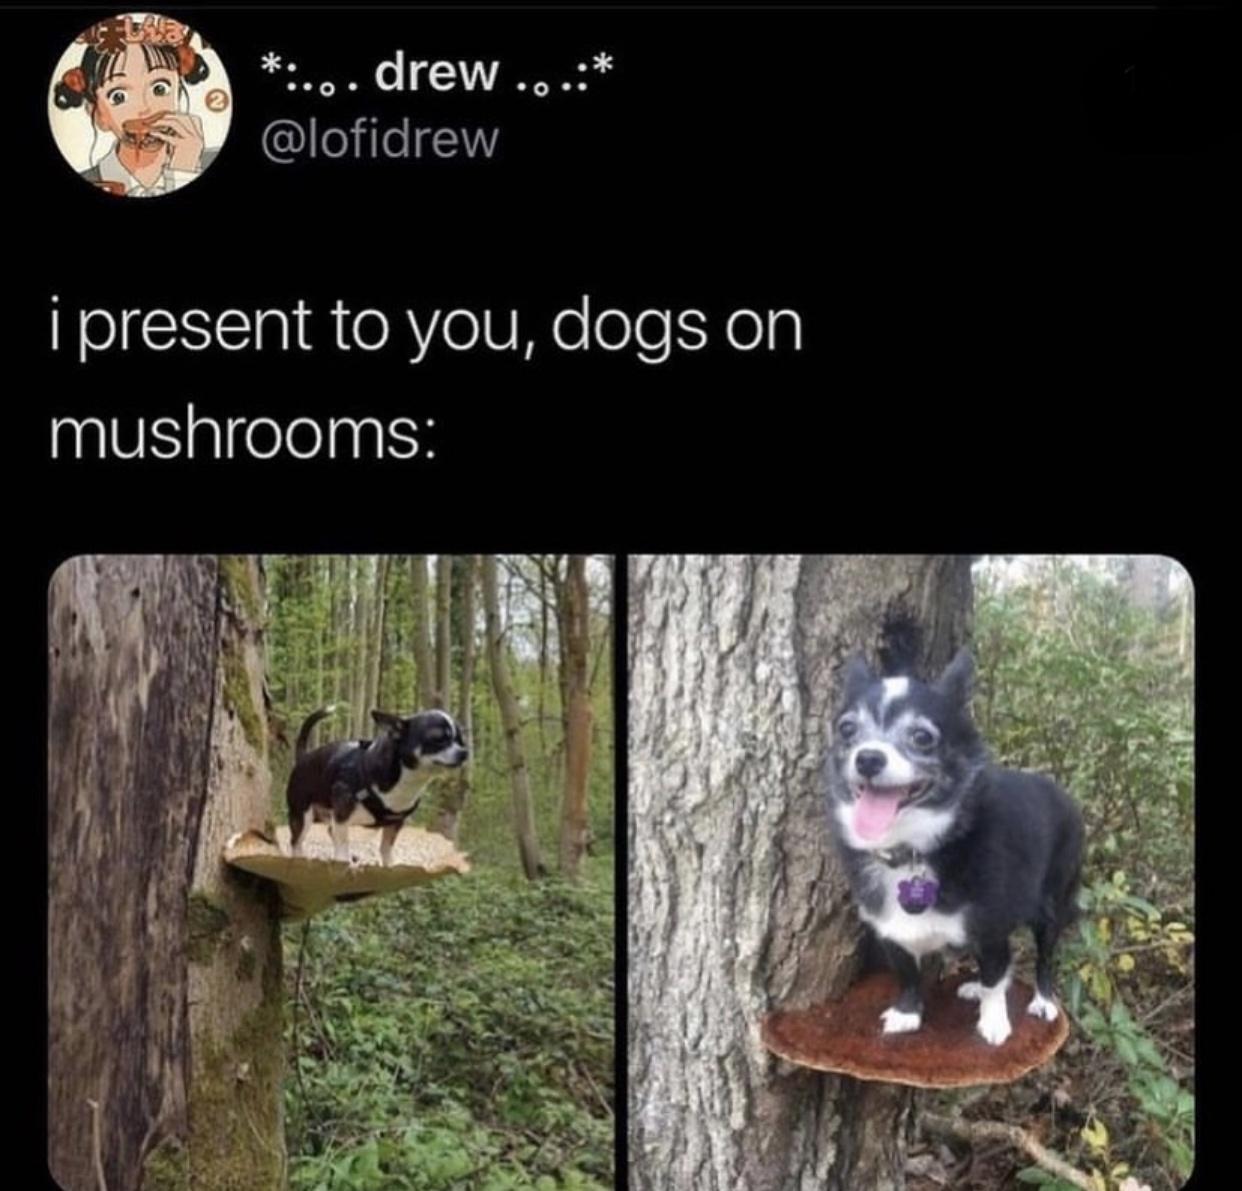 dog on mushrooms - ....drew ... i present to you, dogs on mushrooms